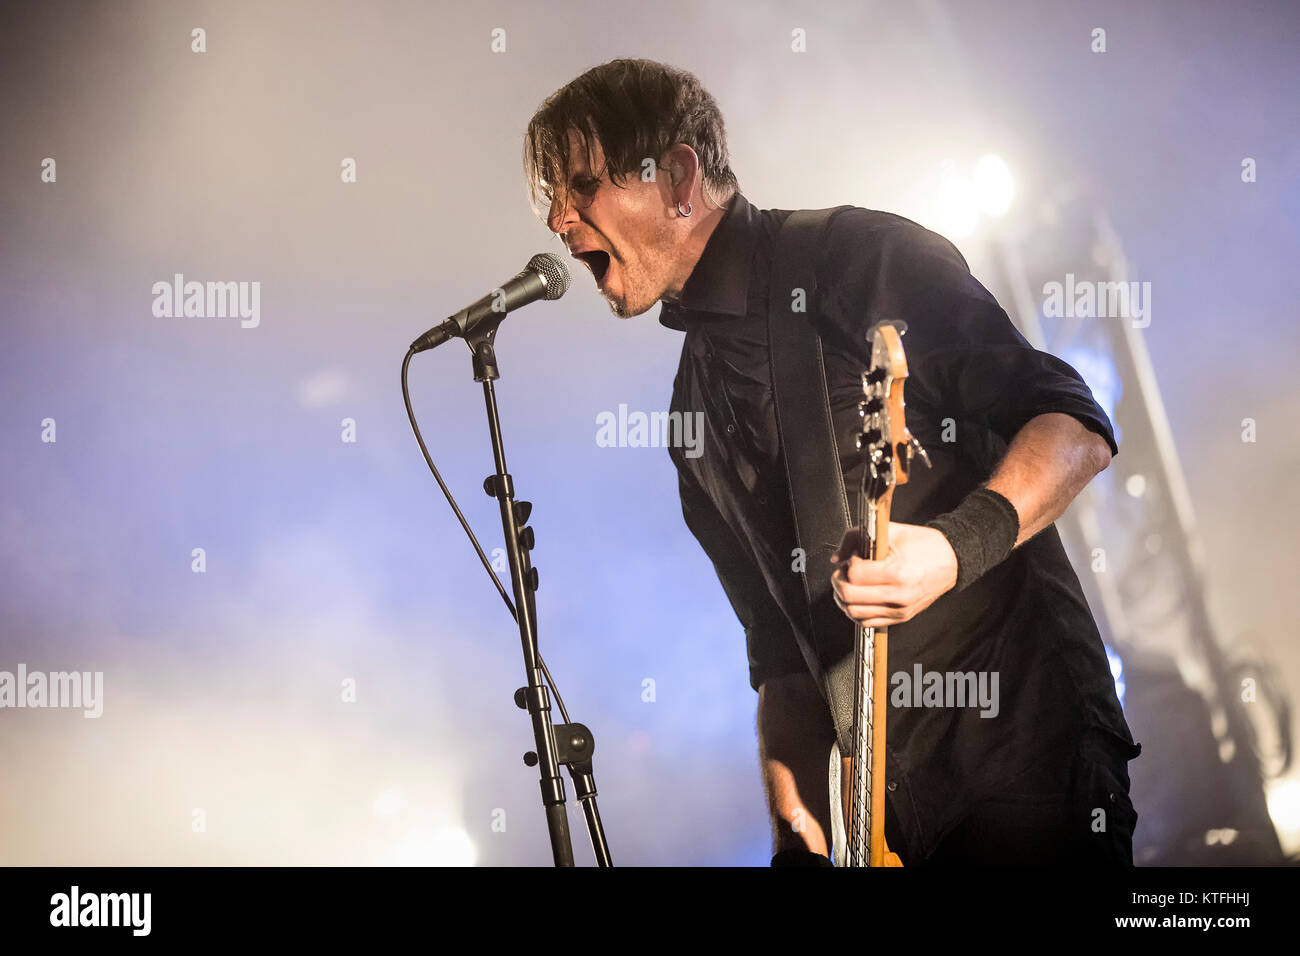 The alternative Norwegian rock band Seigmen (previously known as Klisne Seigmenn) performs a live concert at Sentrum Scene. Here bass player Kim Ljung is seen live on stage. Norway, 30/09 2016. Stock Photo